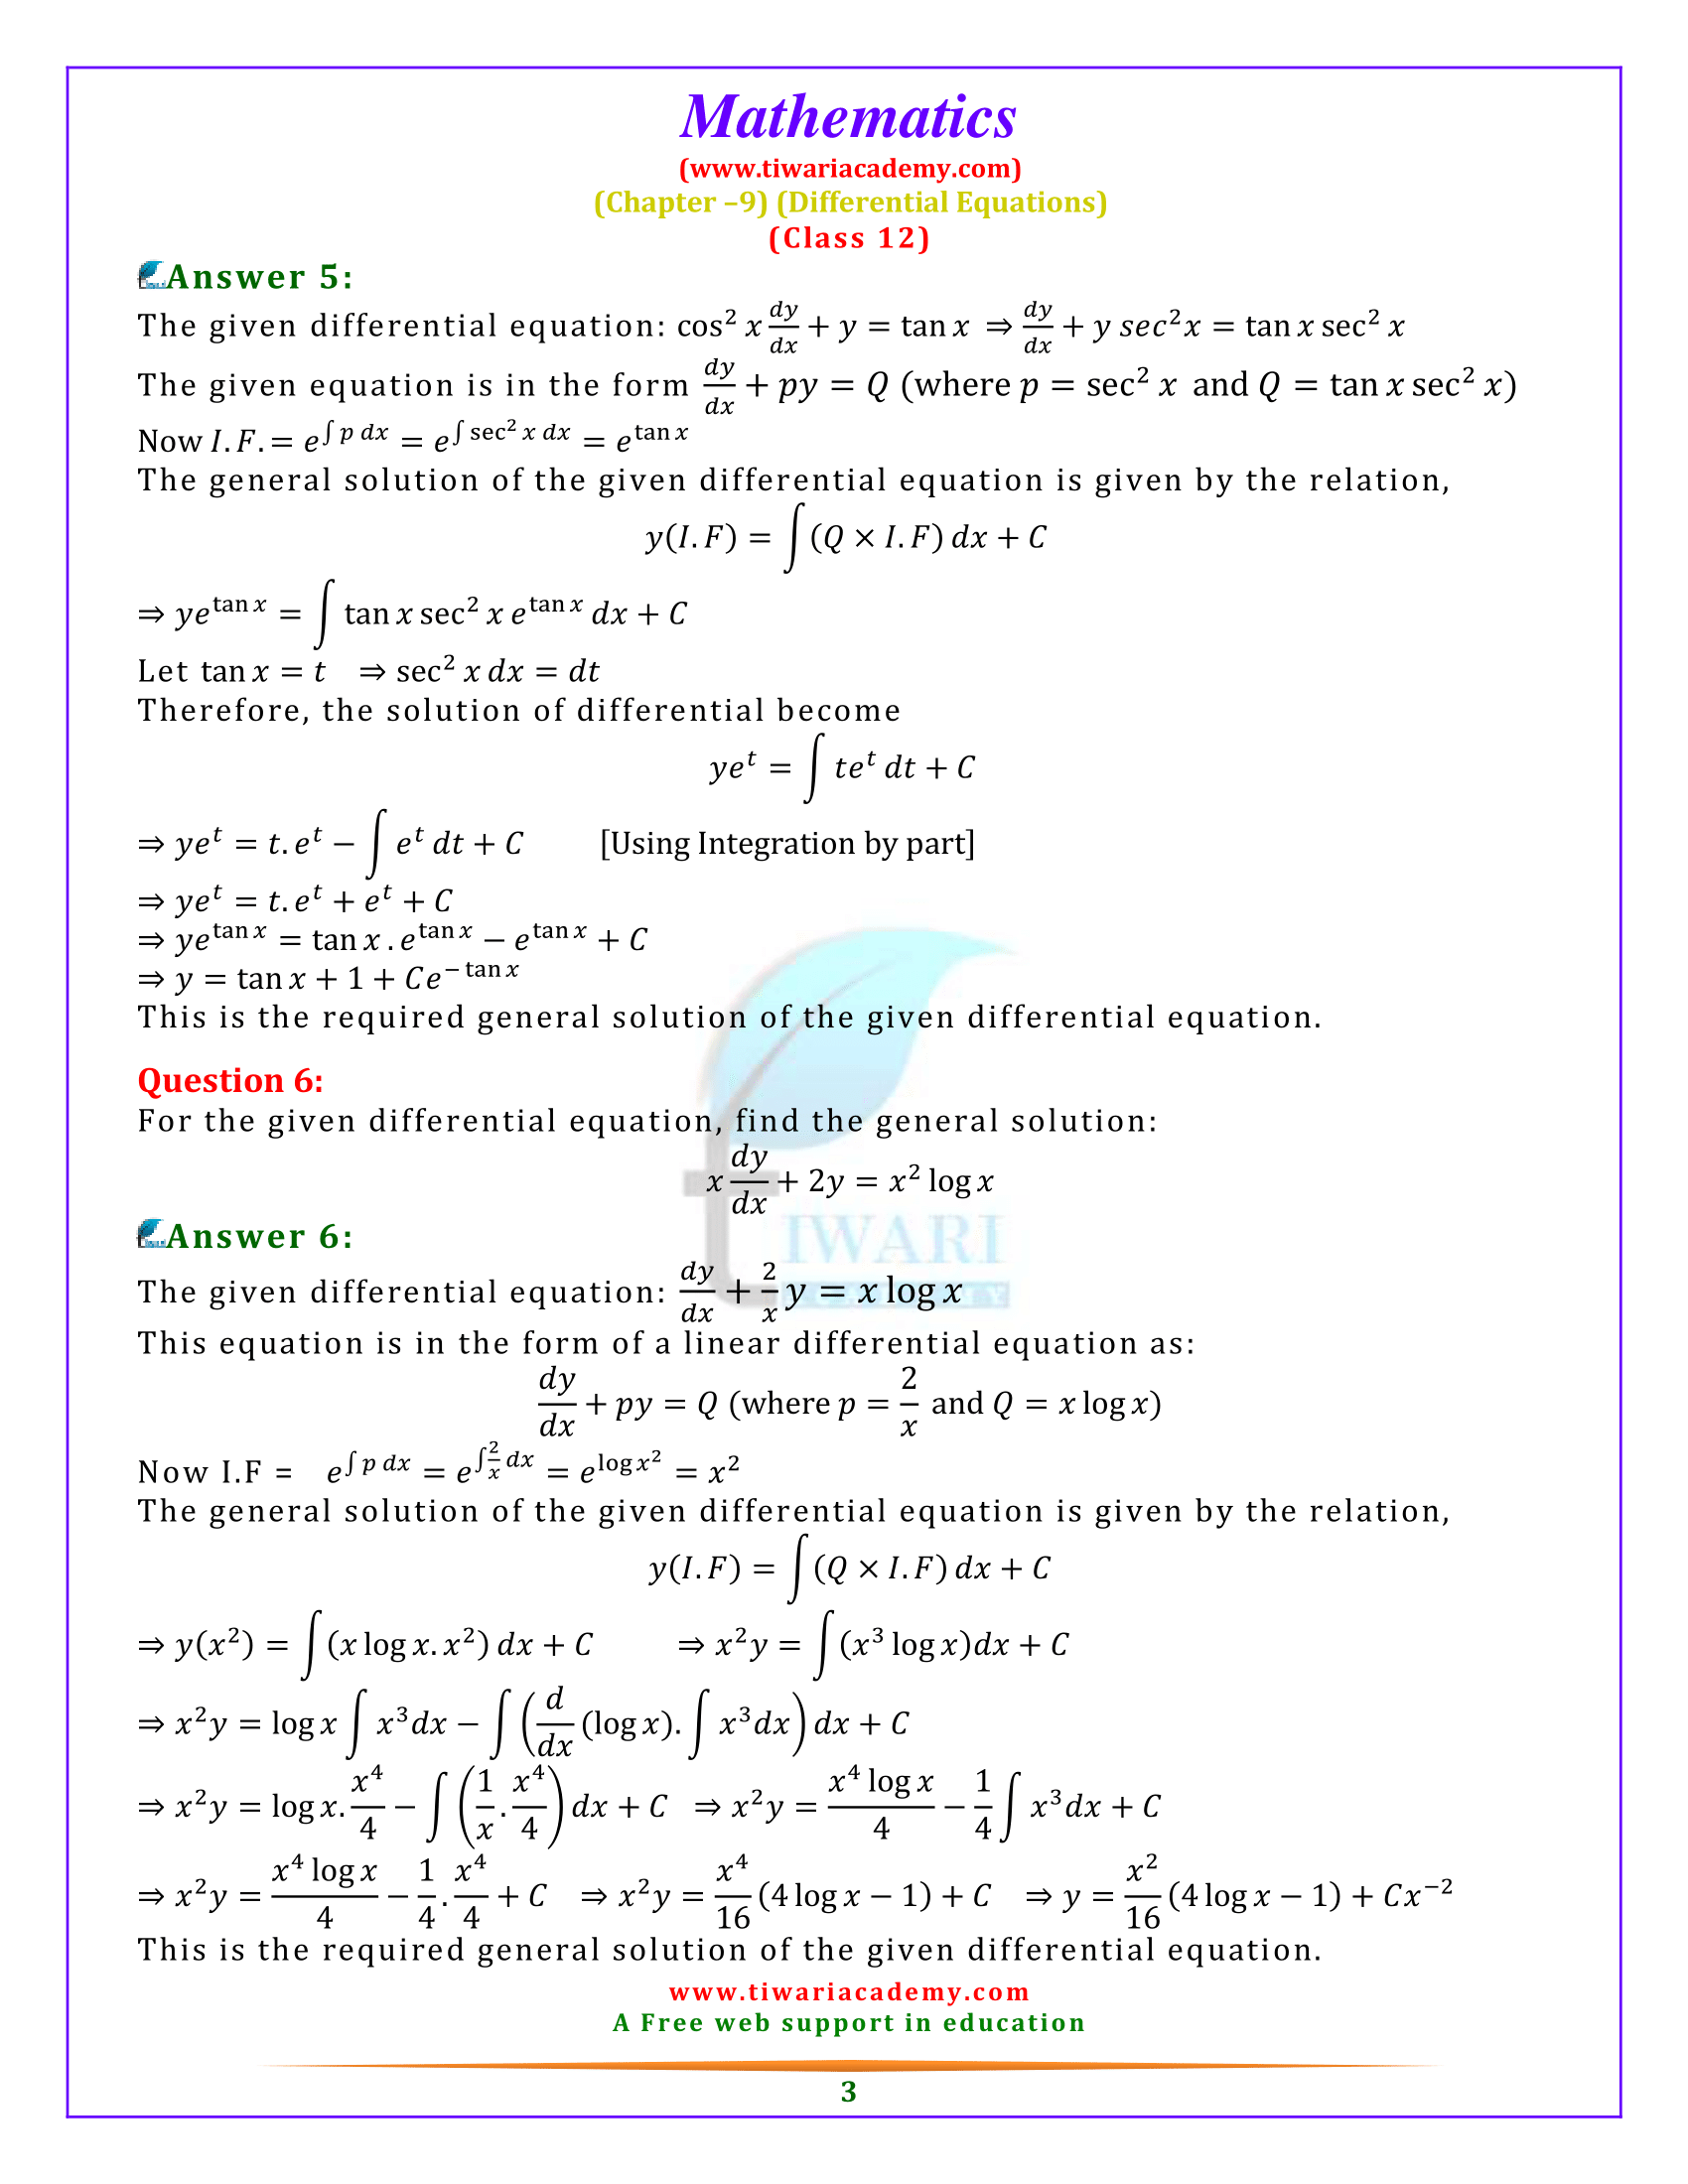 Class 12 Maths Exercise 9.6 Solutions free